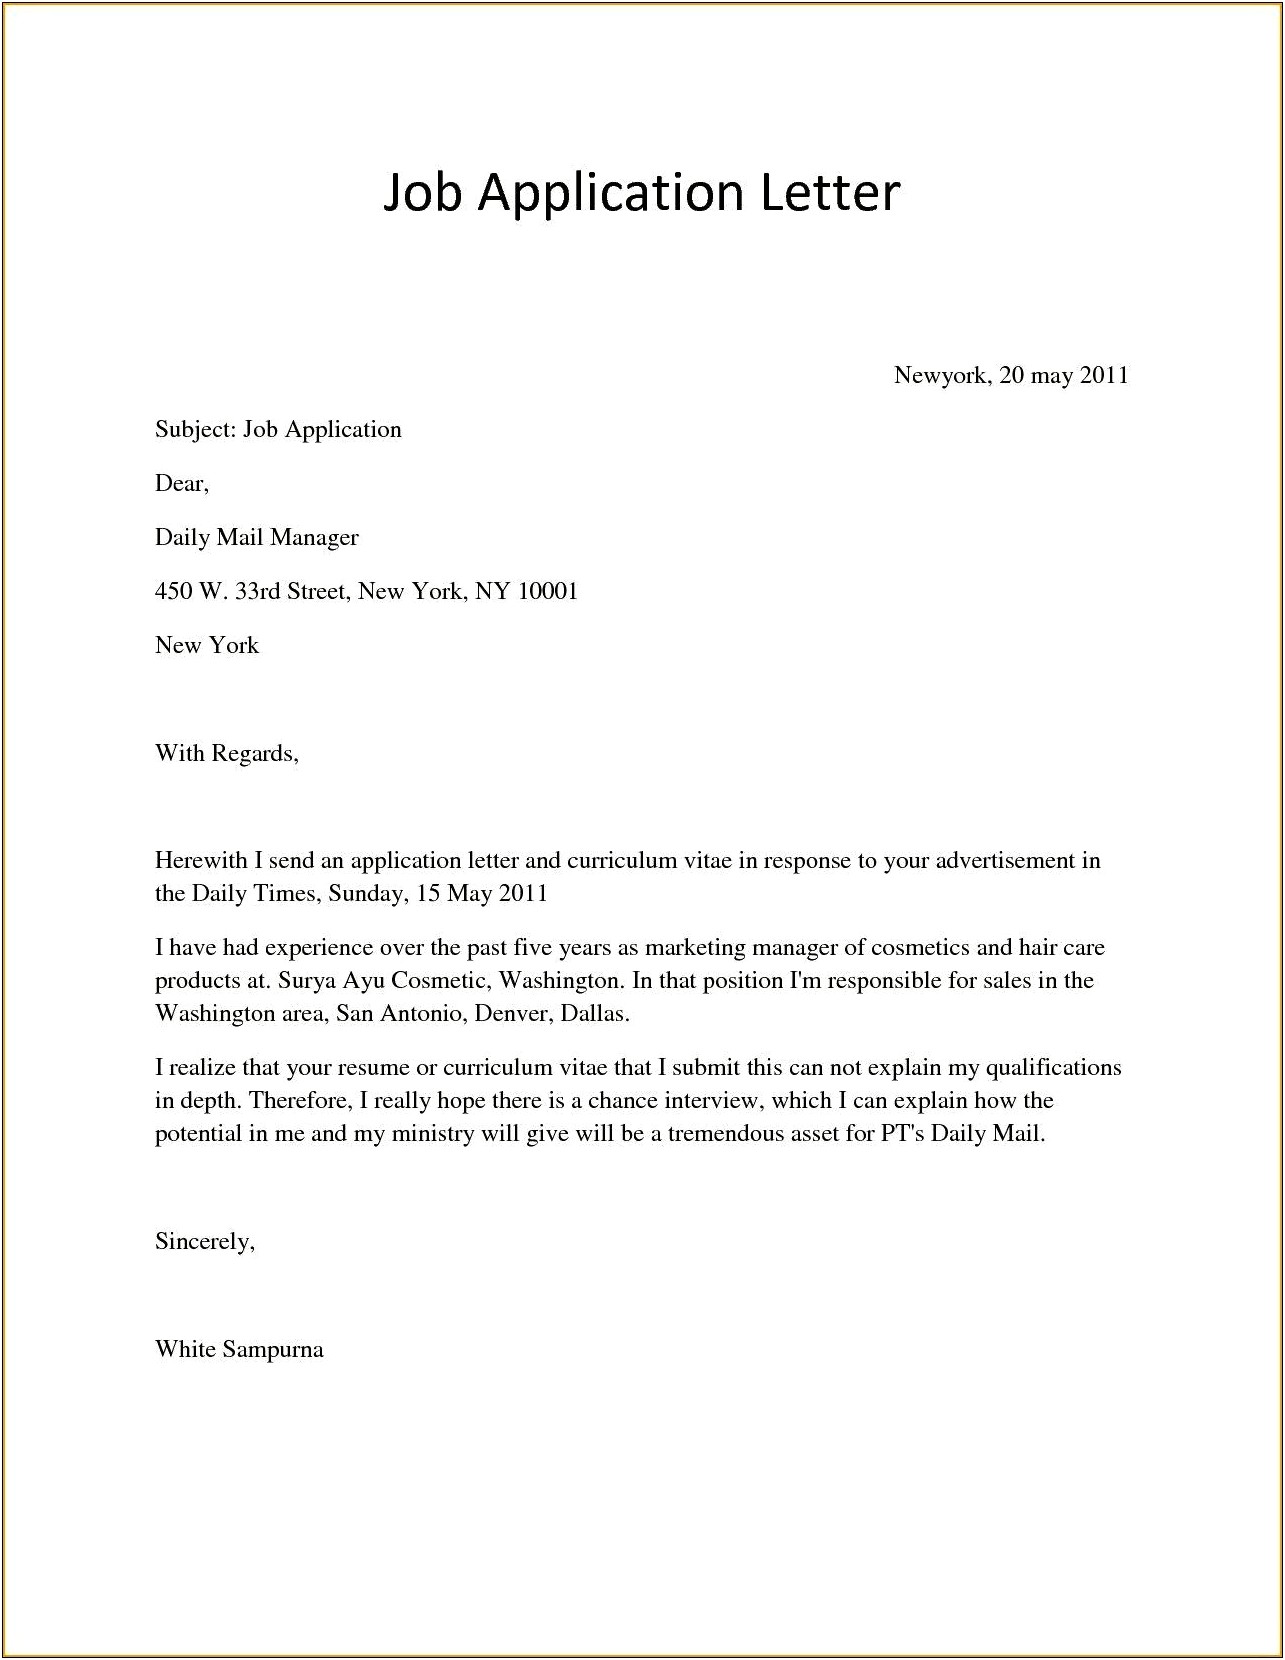 Resume Funny Job Application Letters